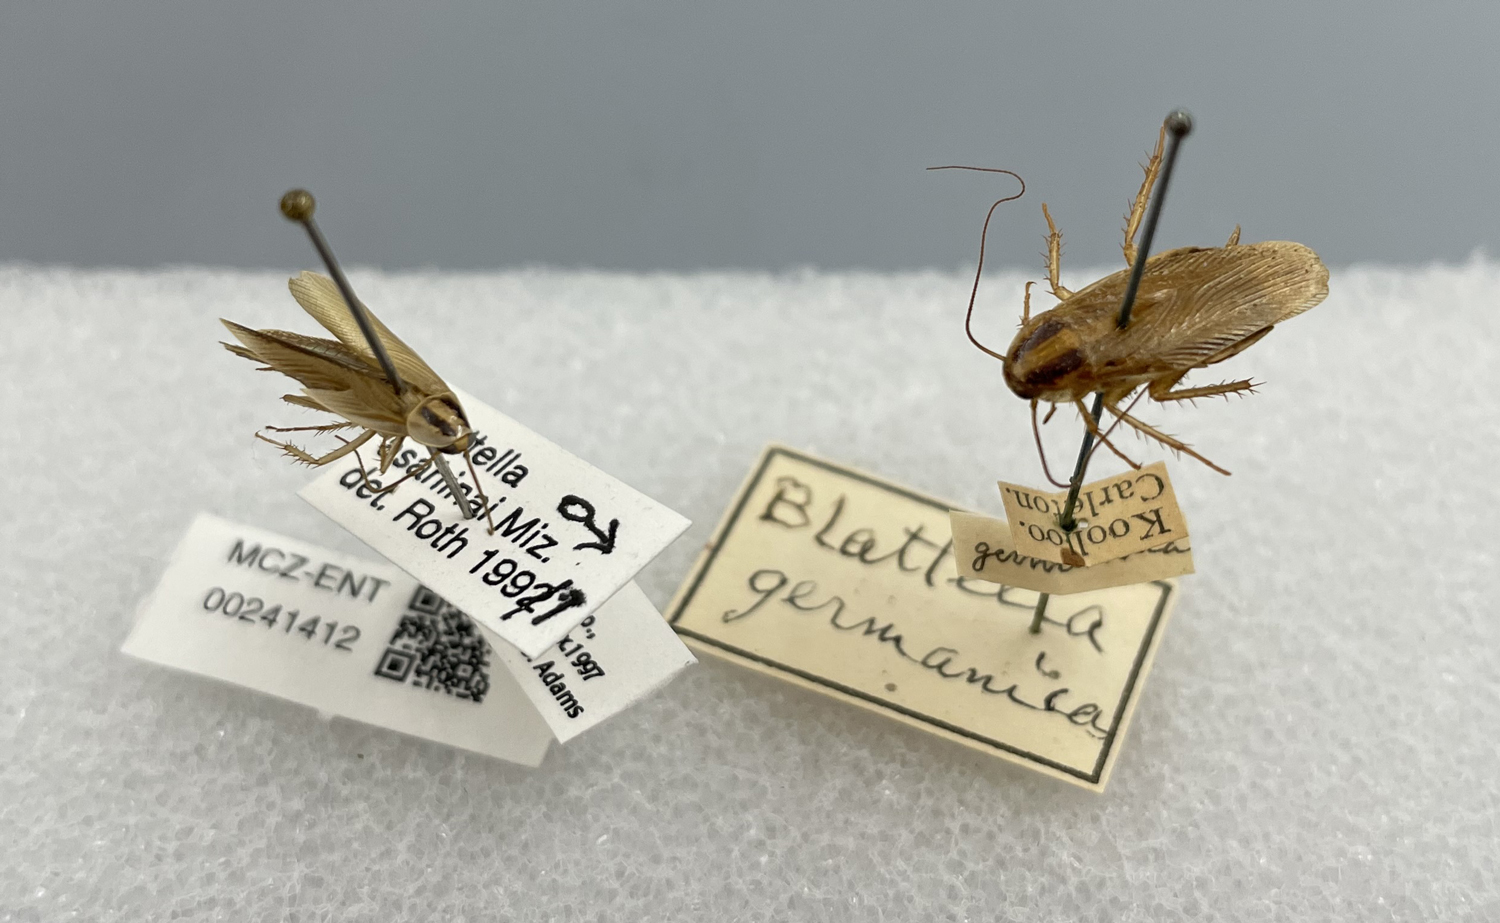 A dead Asian cockroach is labeled and displayed next to a dead, labeled German cockroach.